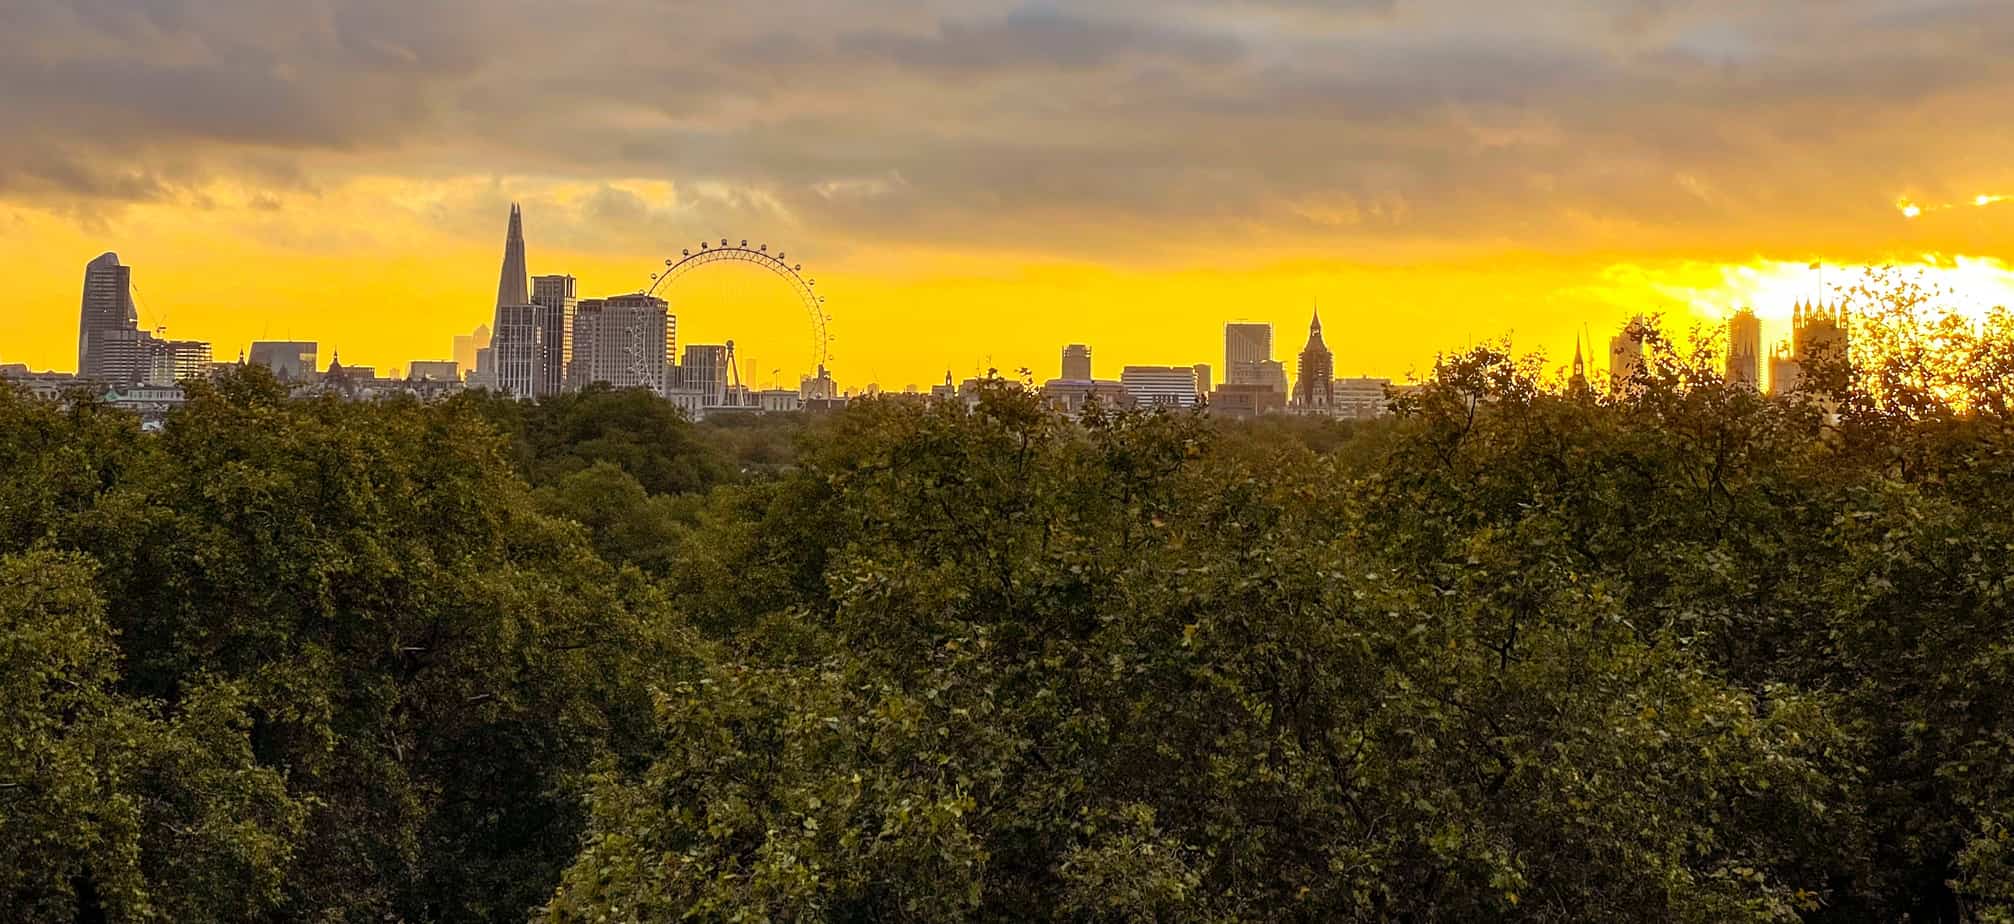 UK - England - London - Autumn in London - view from the Lounge at the Athenaeum